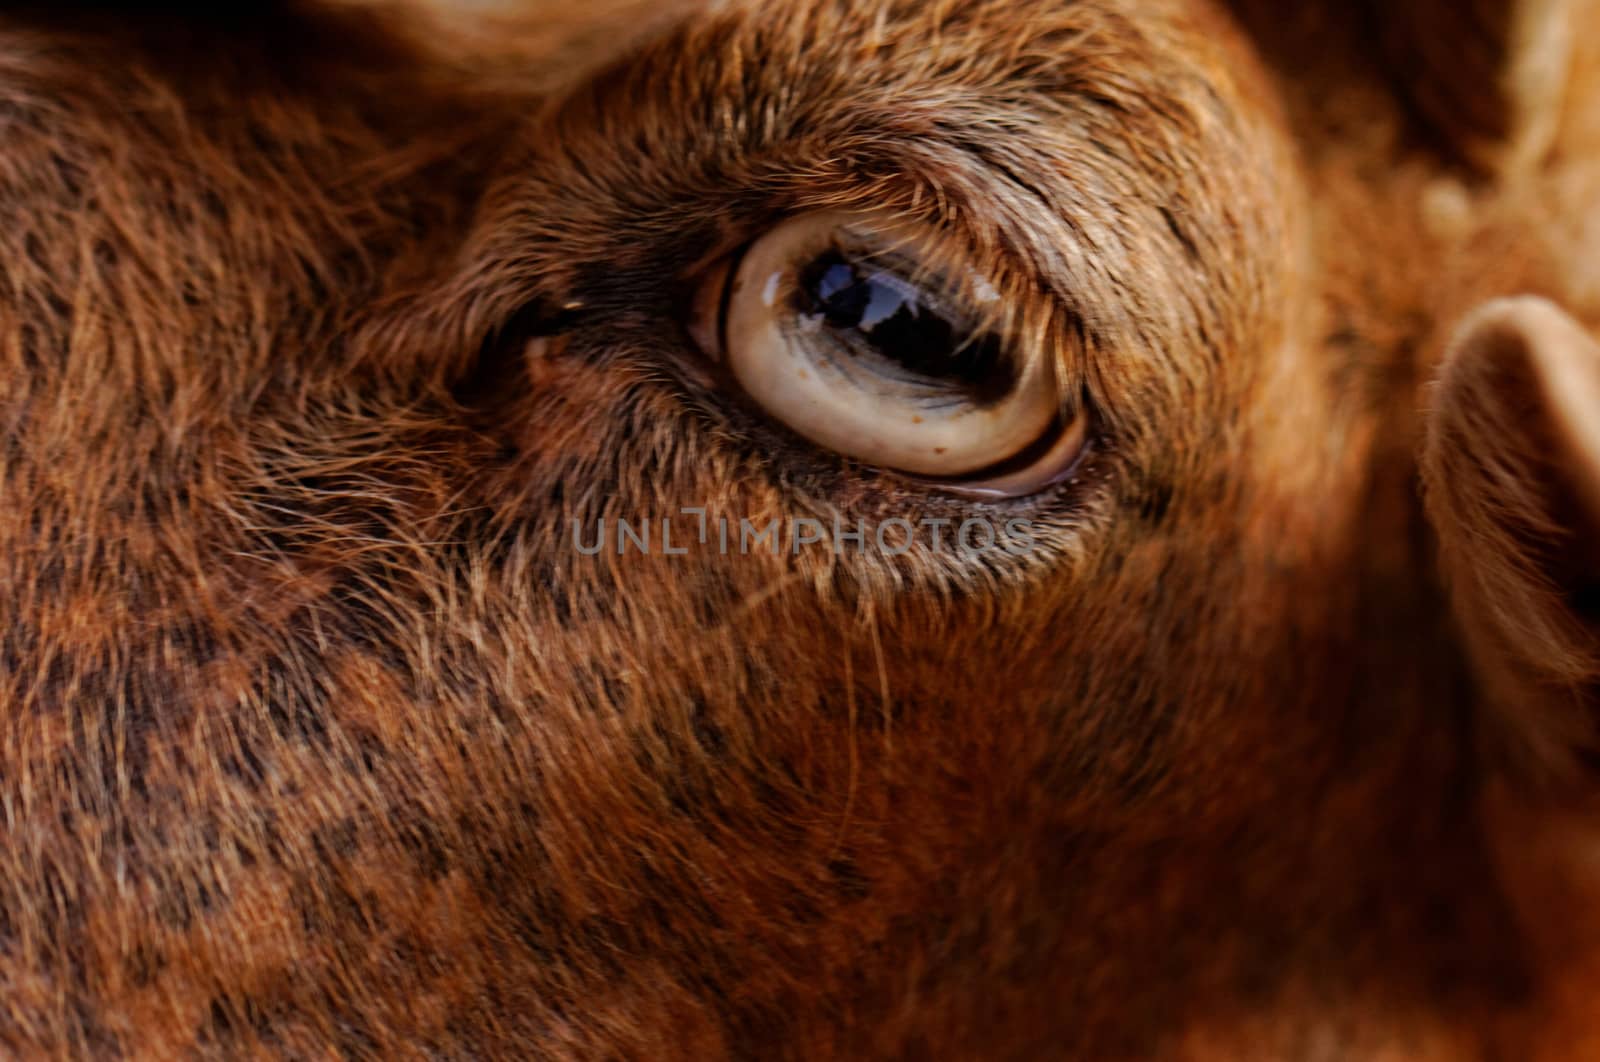 close up picture about yellow goats eye